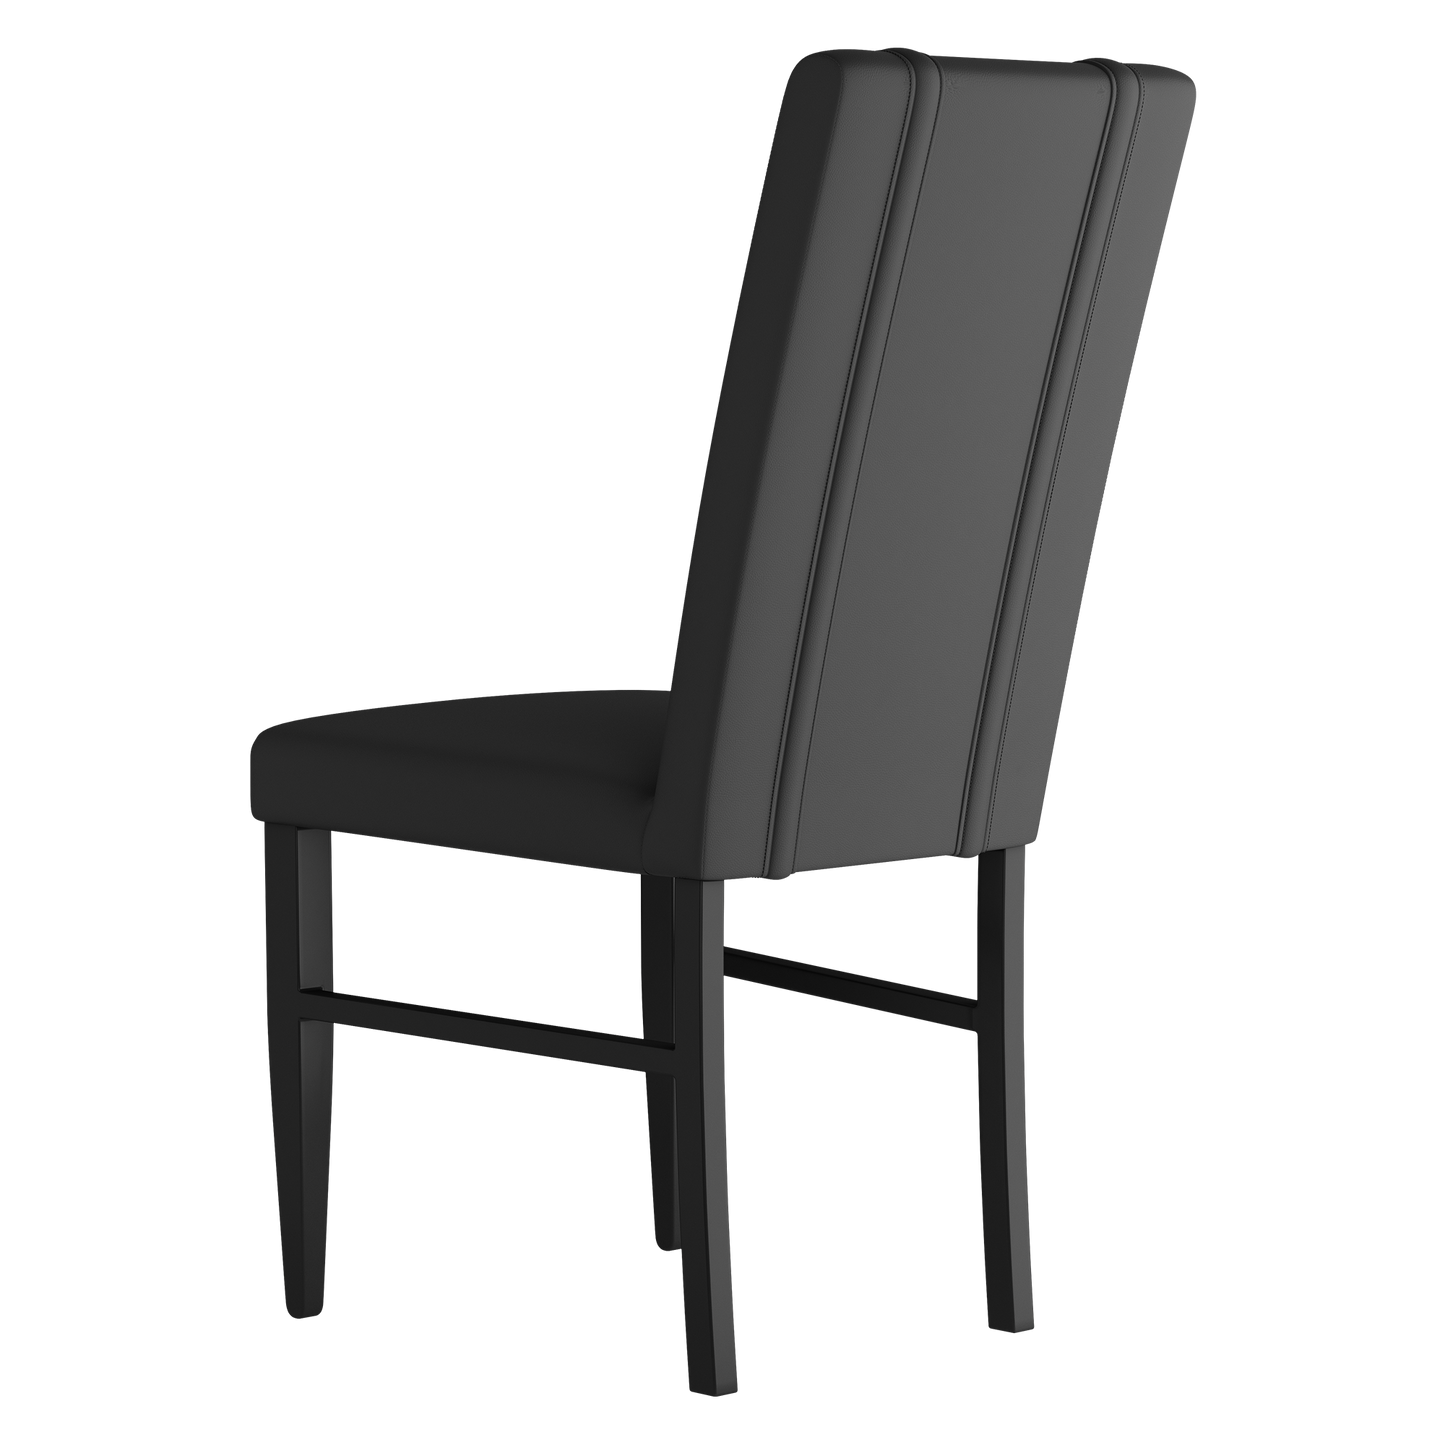 Side Chair 2000 with Houston Astros Secondary Set of 2